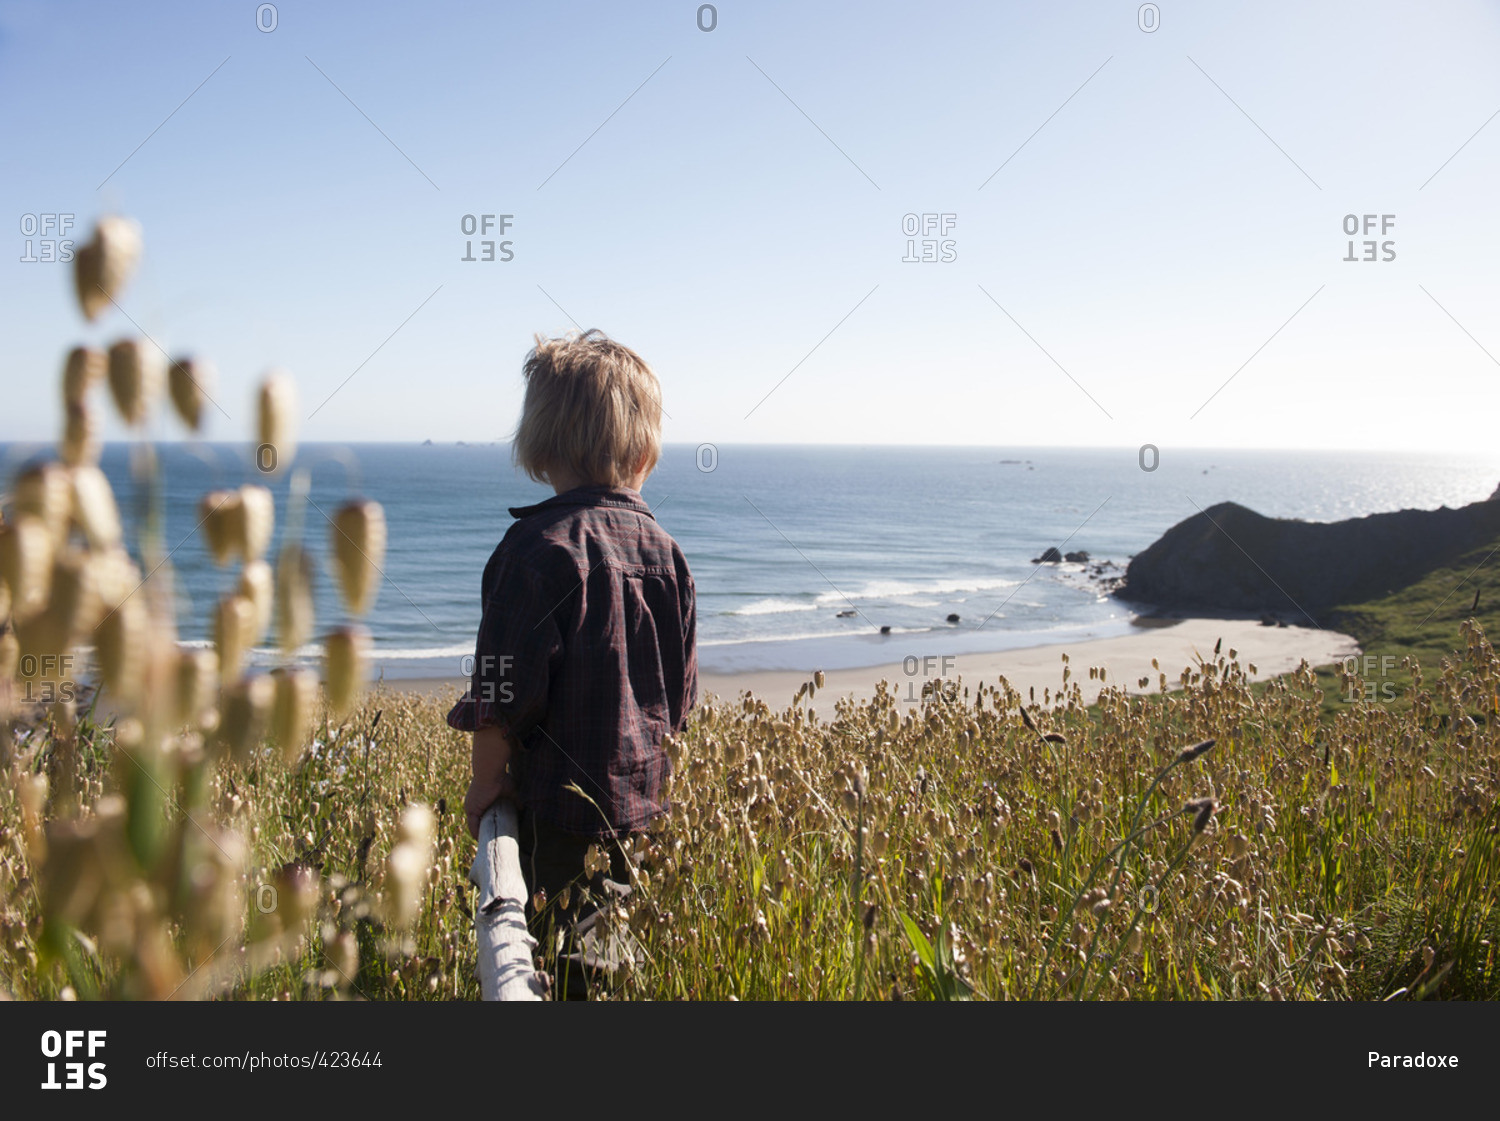 Child looking at tranquil beach view